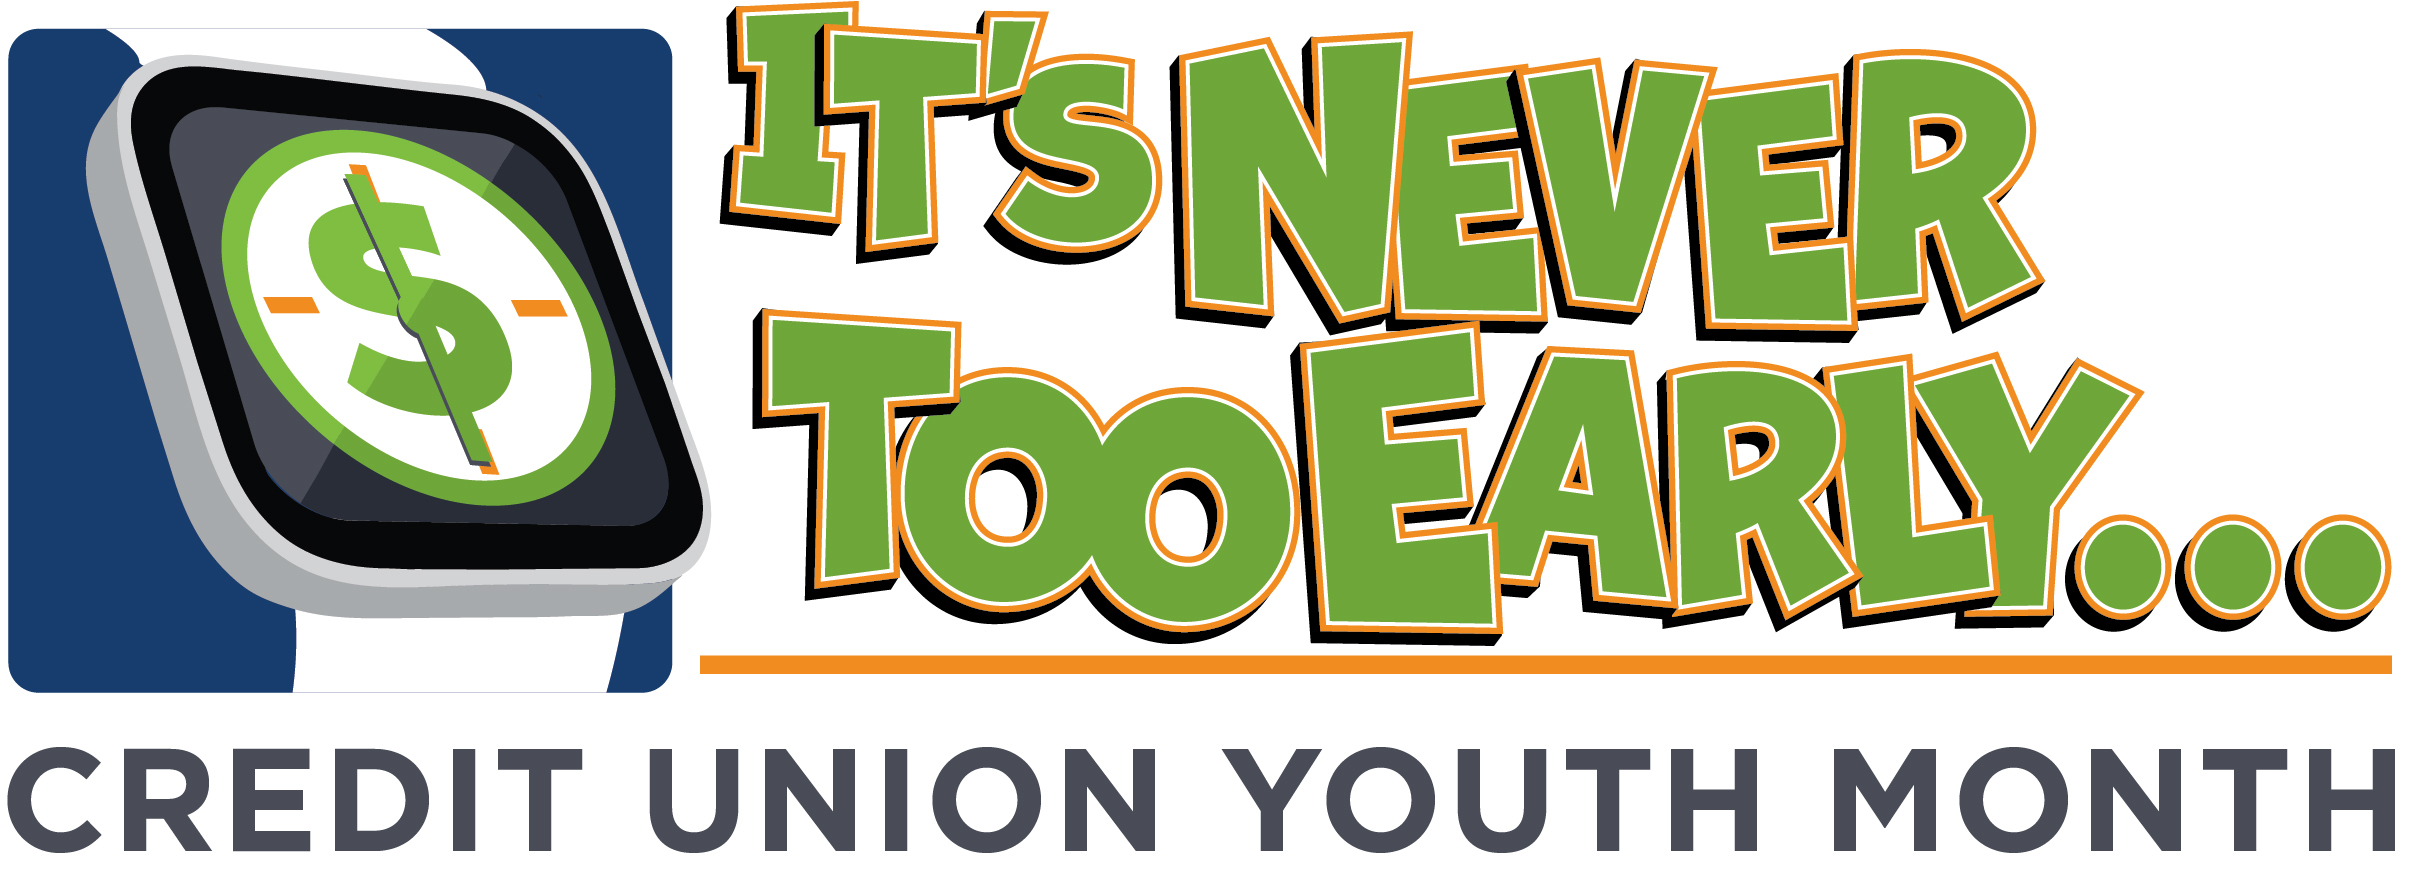 Credit Union Youth Month Logo